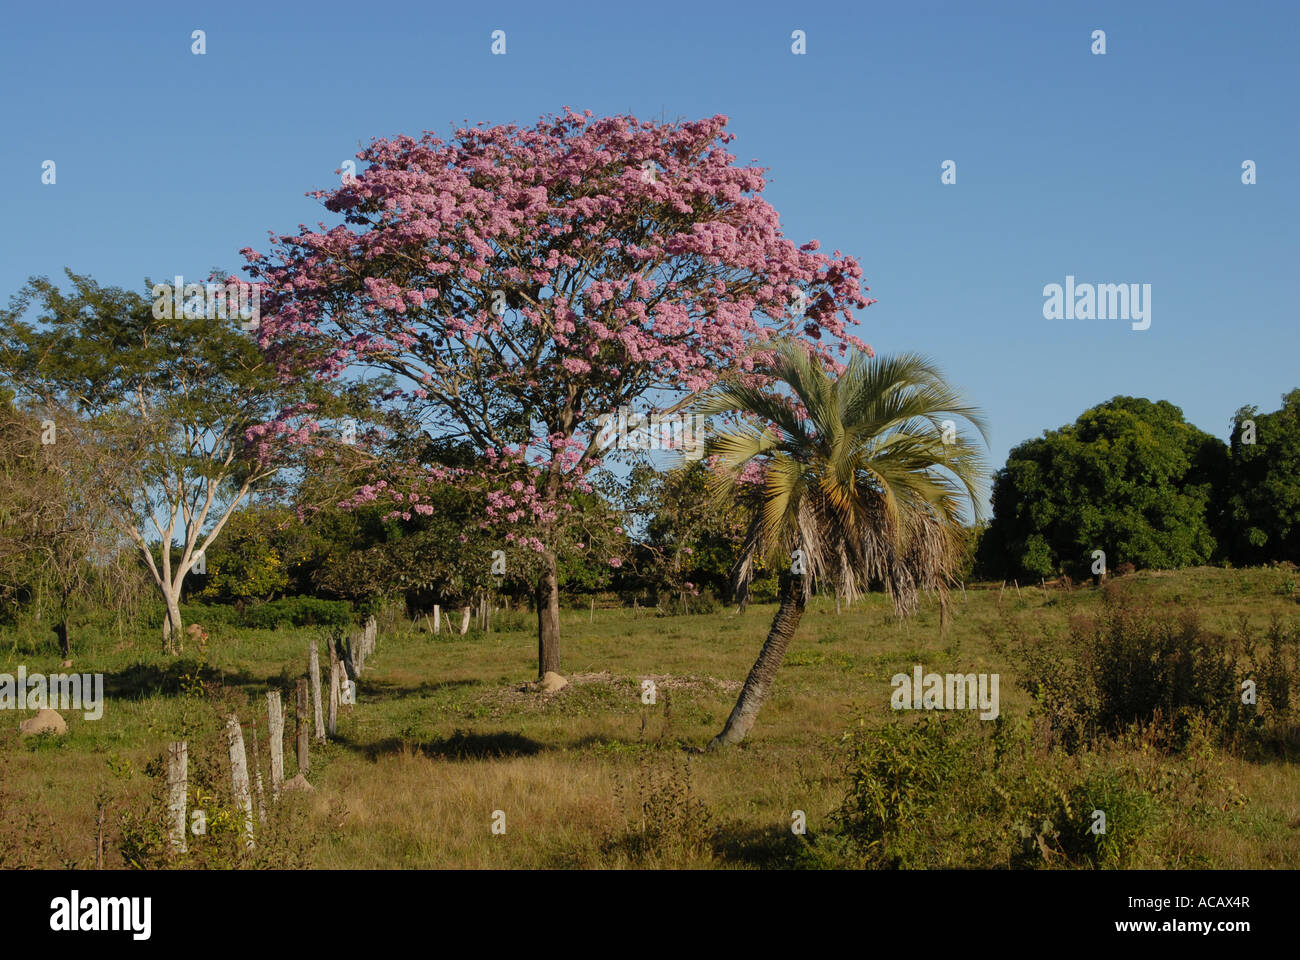 Lapacho tree (Tabebuia heptaphylla) with pink flowers, Paraguay Stock Photo